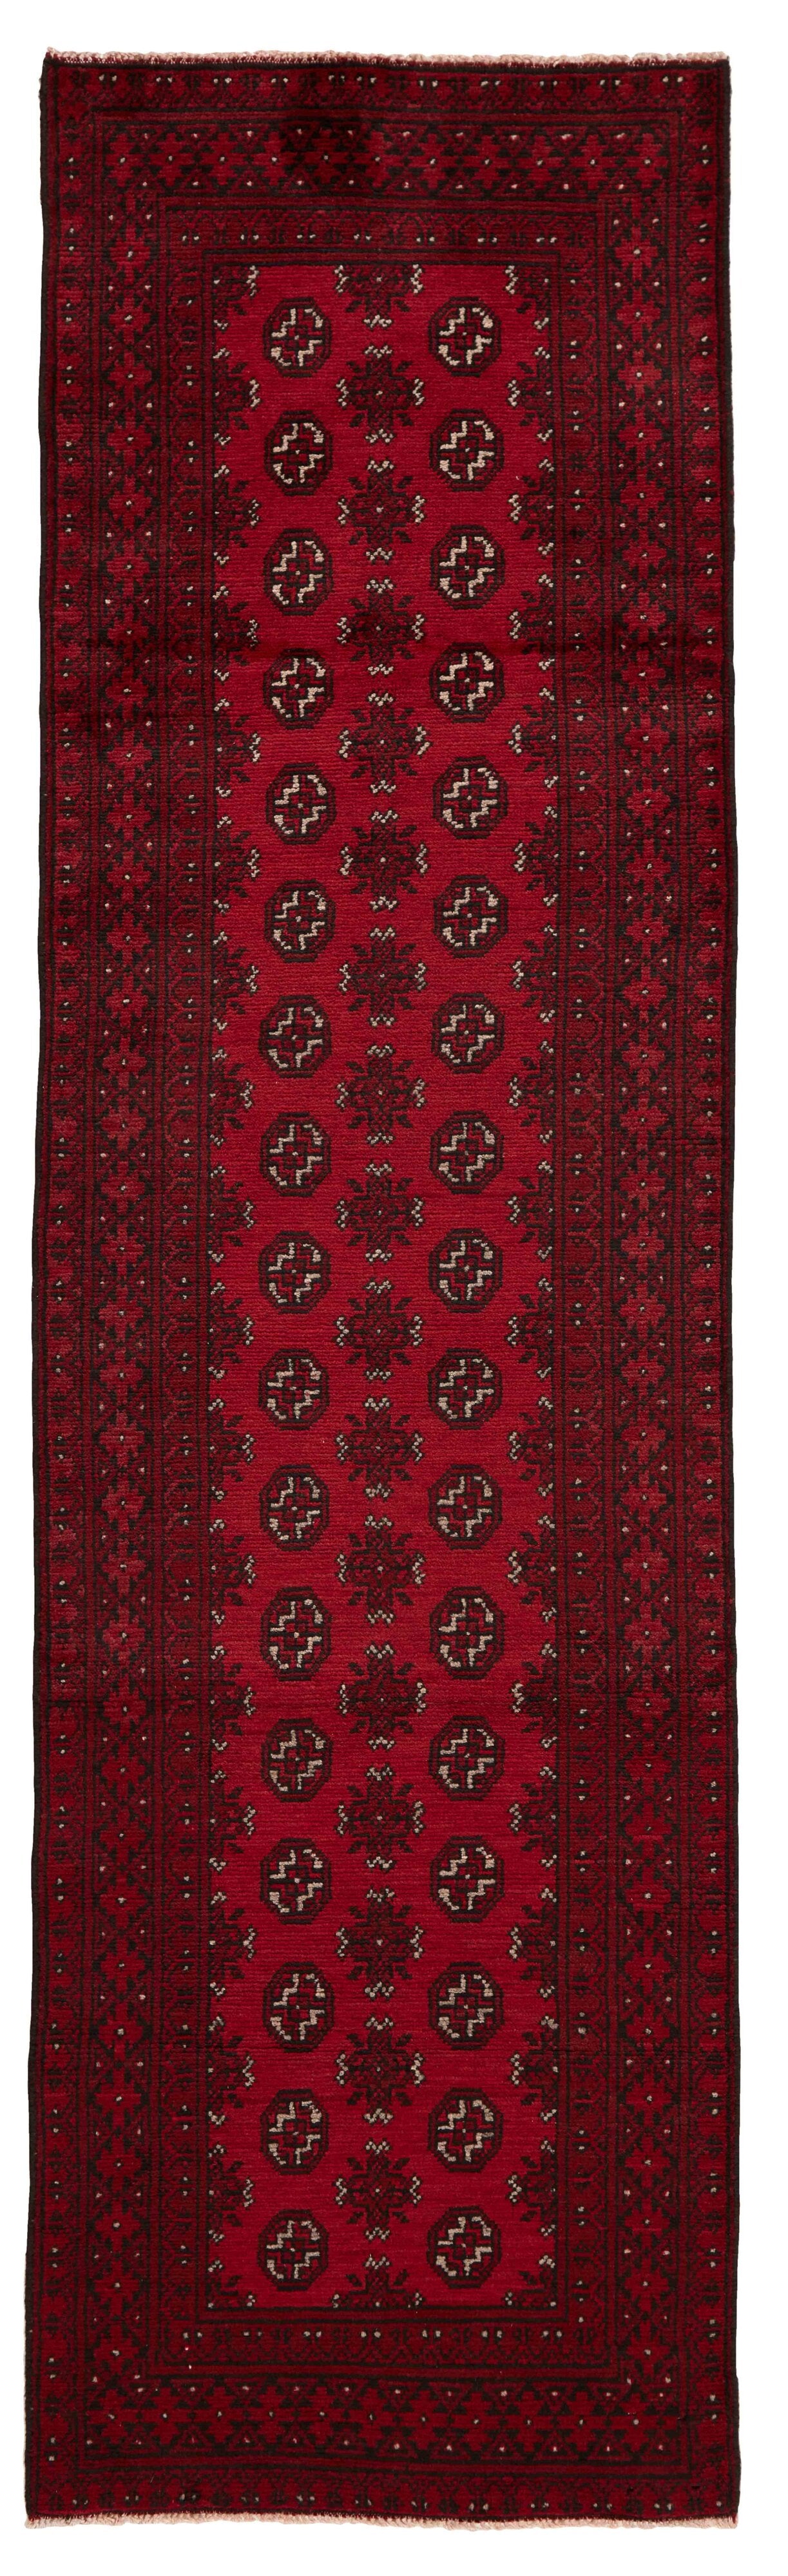 Red oriental runner with traditional Elephant's foot pattern